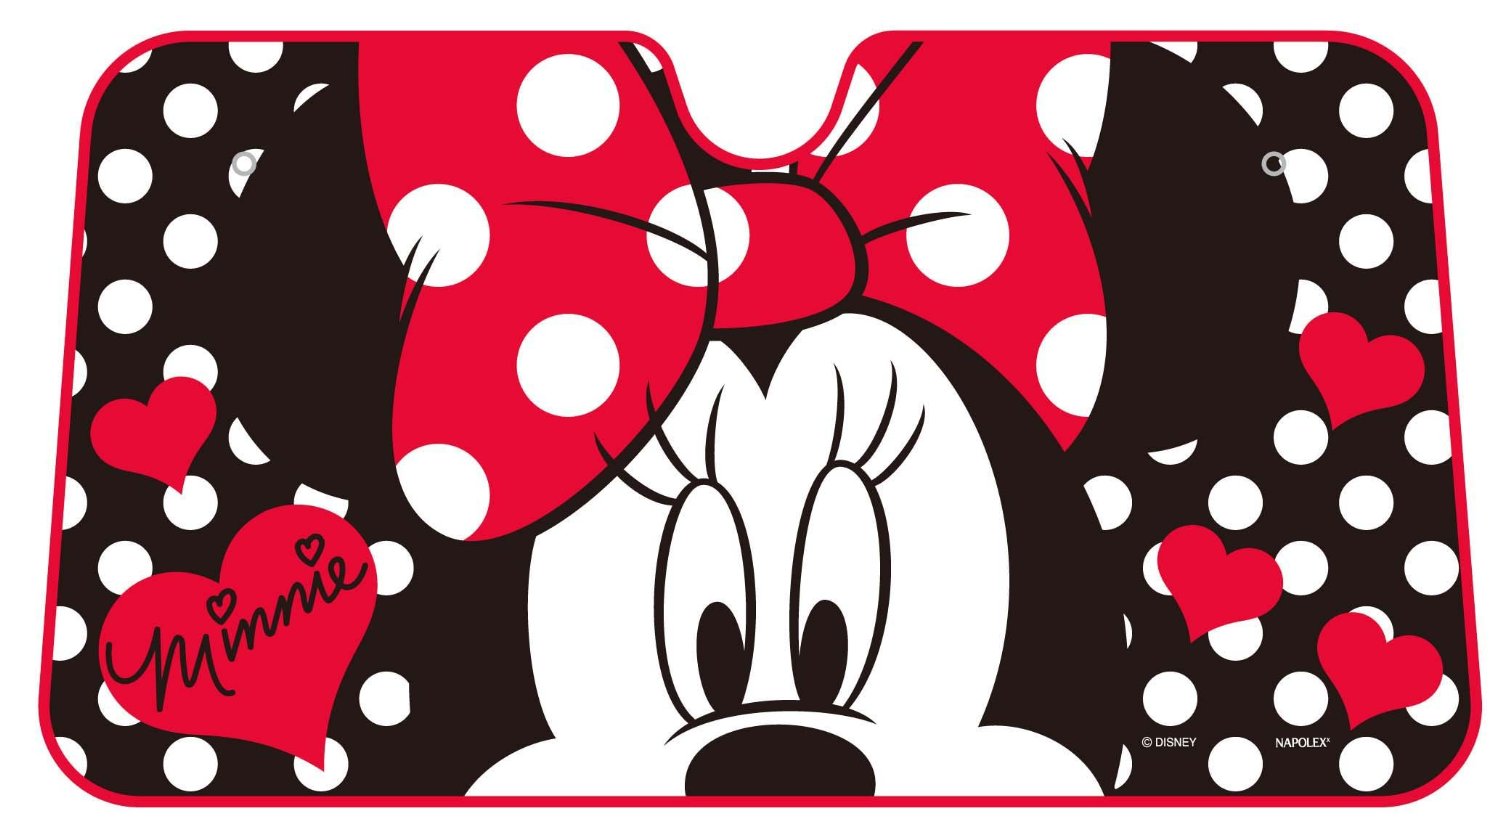 2 x Genuine Disney Minnie Mouse Sun Shades for Car Window Blinds for Kids MM CCH 